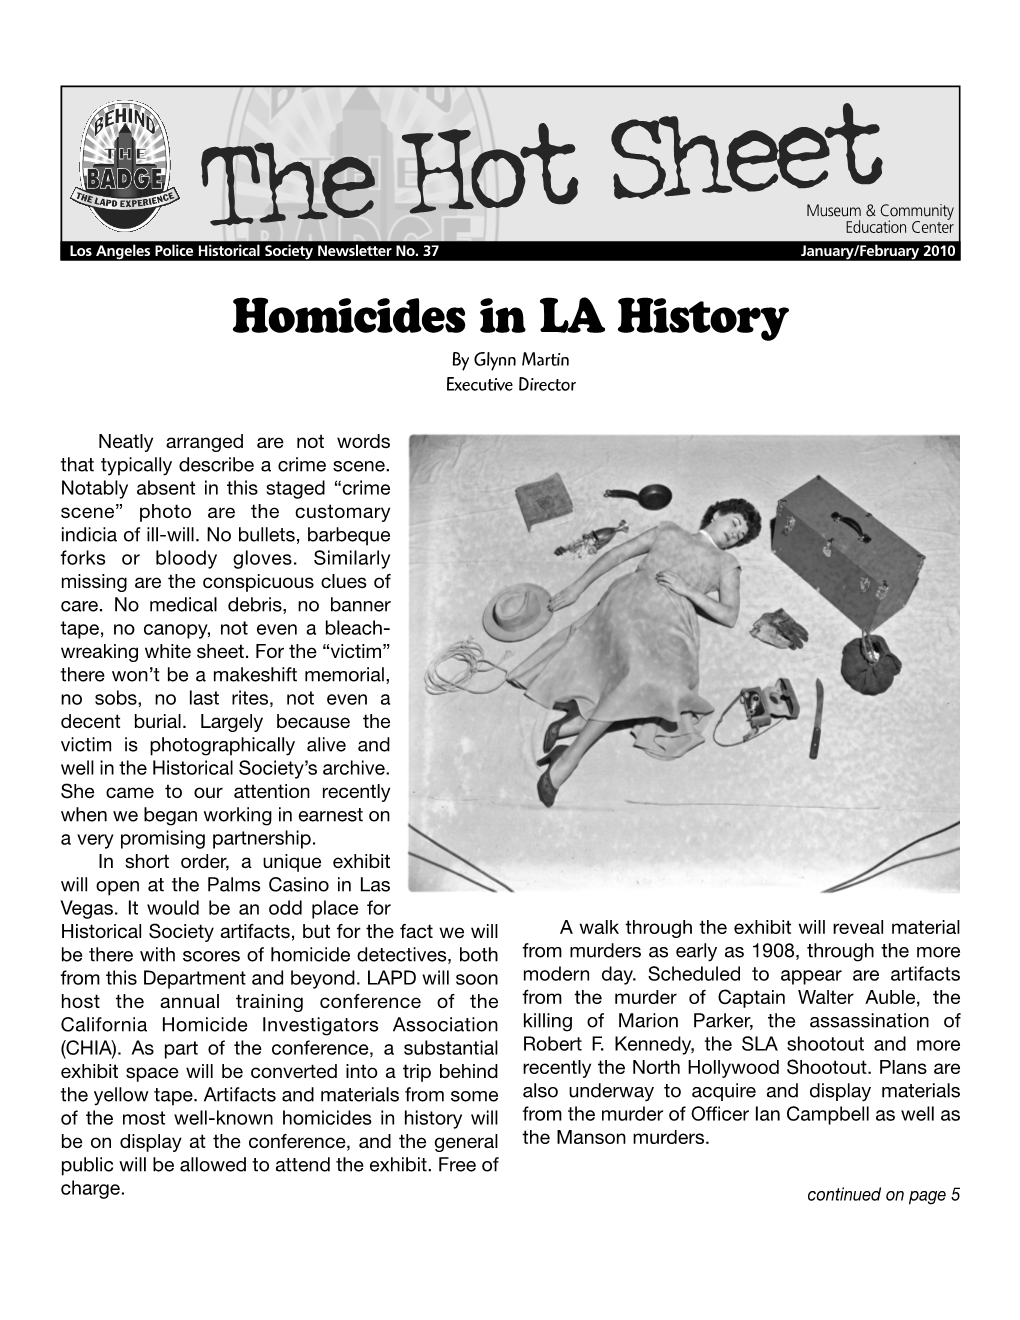 February 2010 Homicides in LA History by Glynn Martin Executive Director